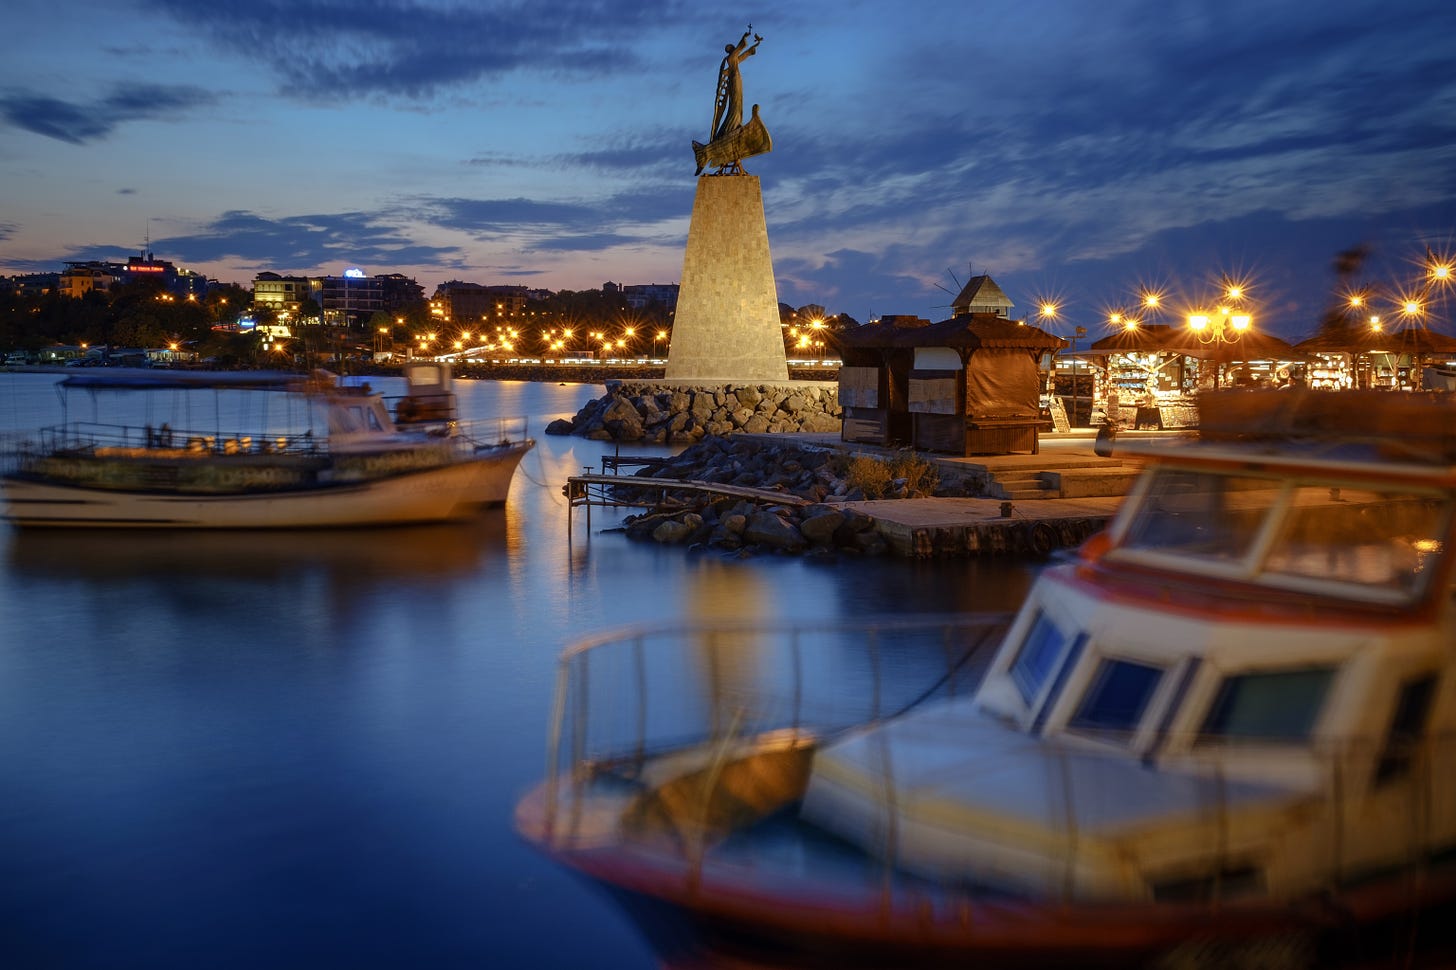 Boats bobbing around in the harbour at dusk. A statue of a person stands on a stone monument.